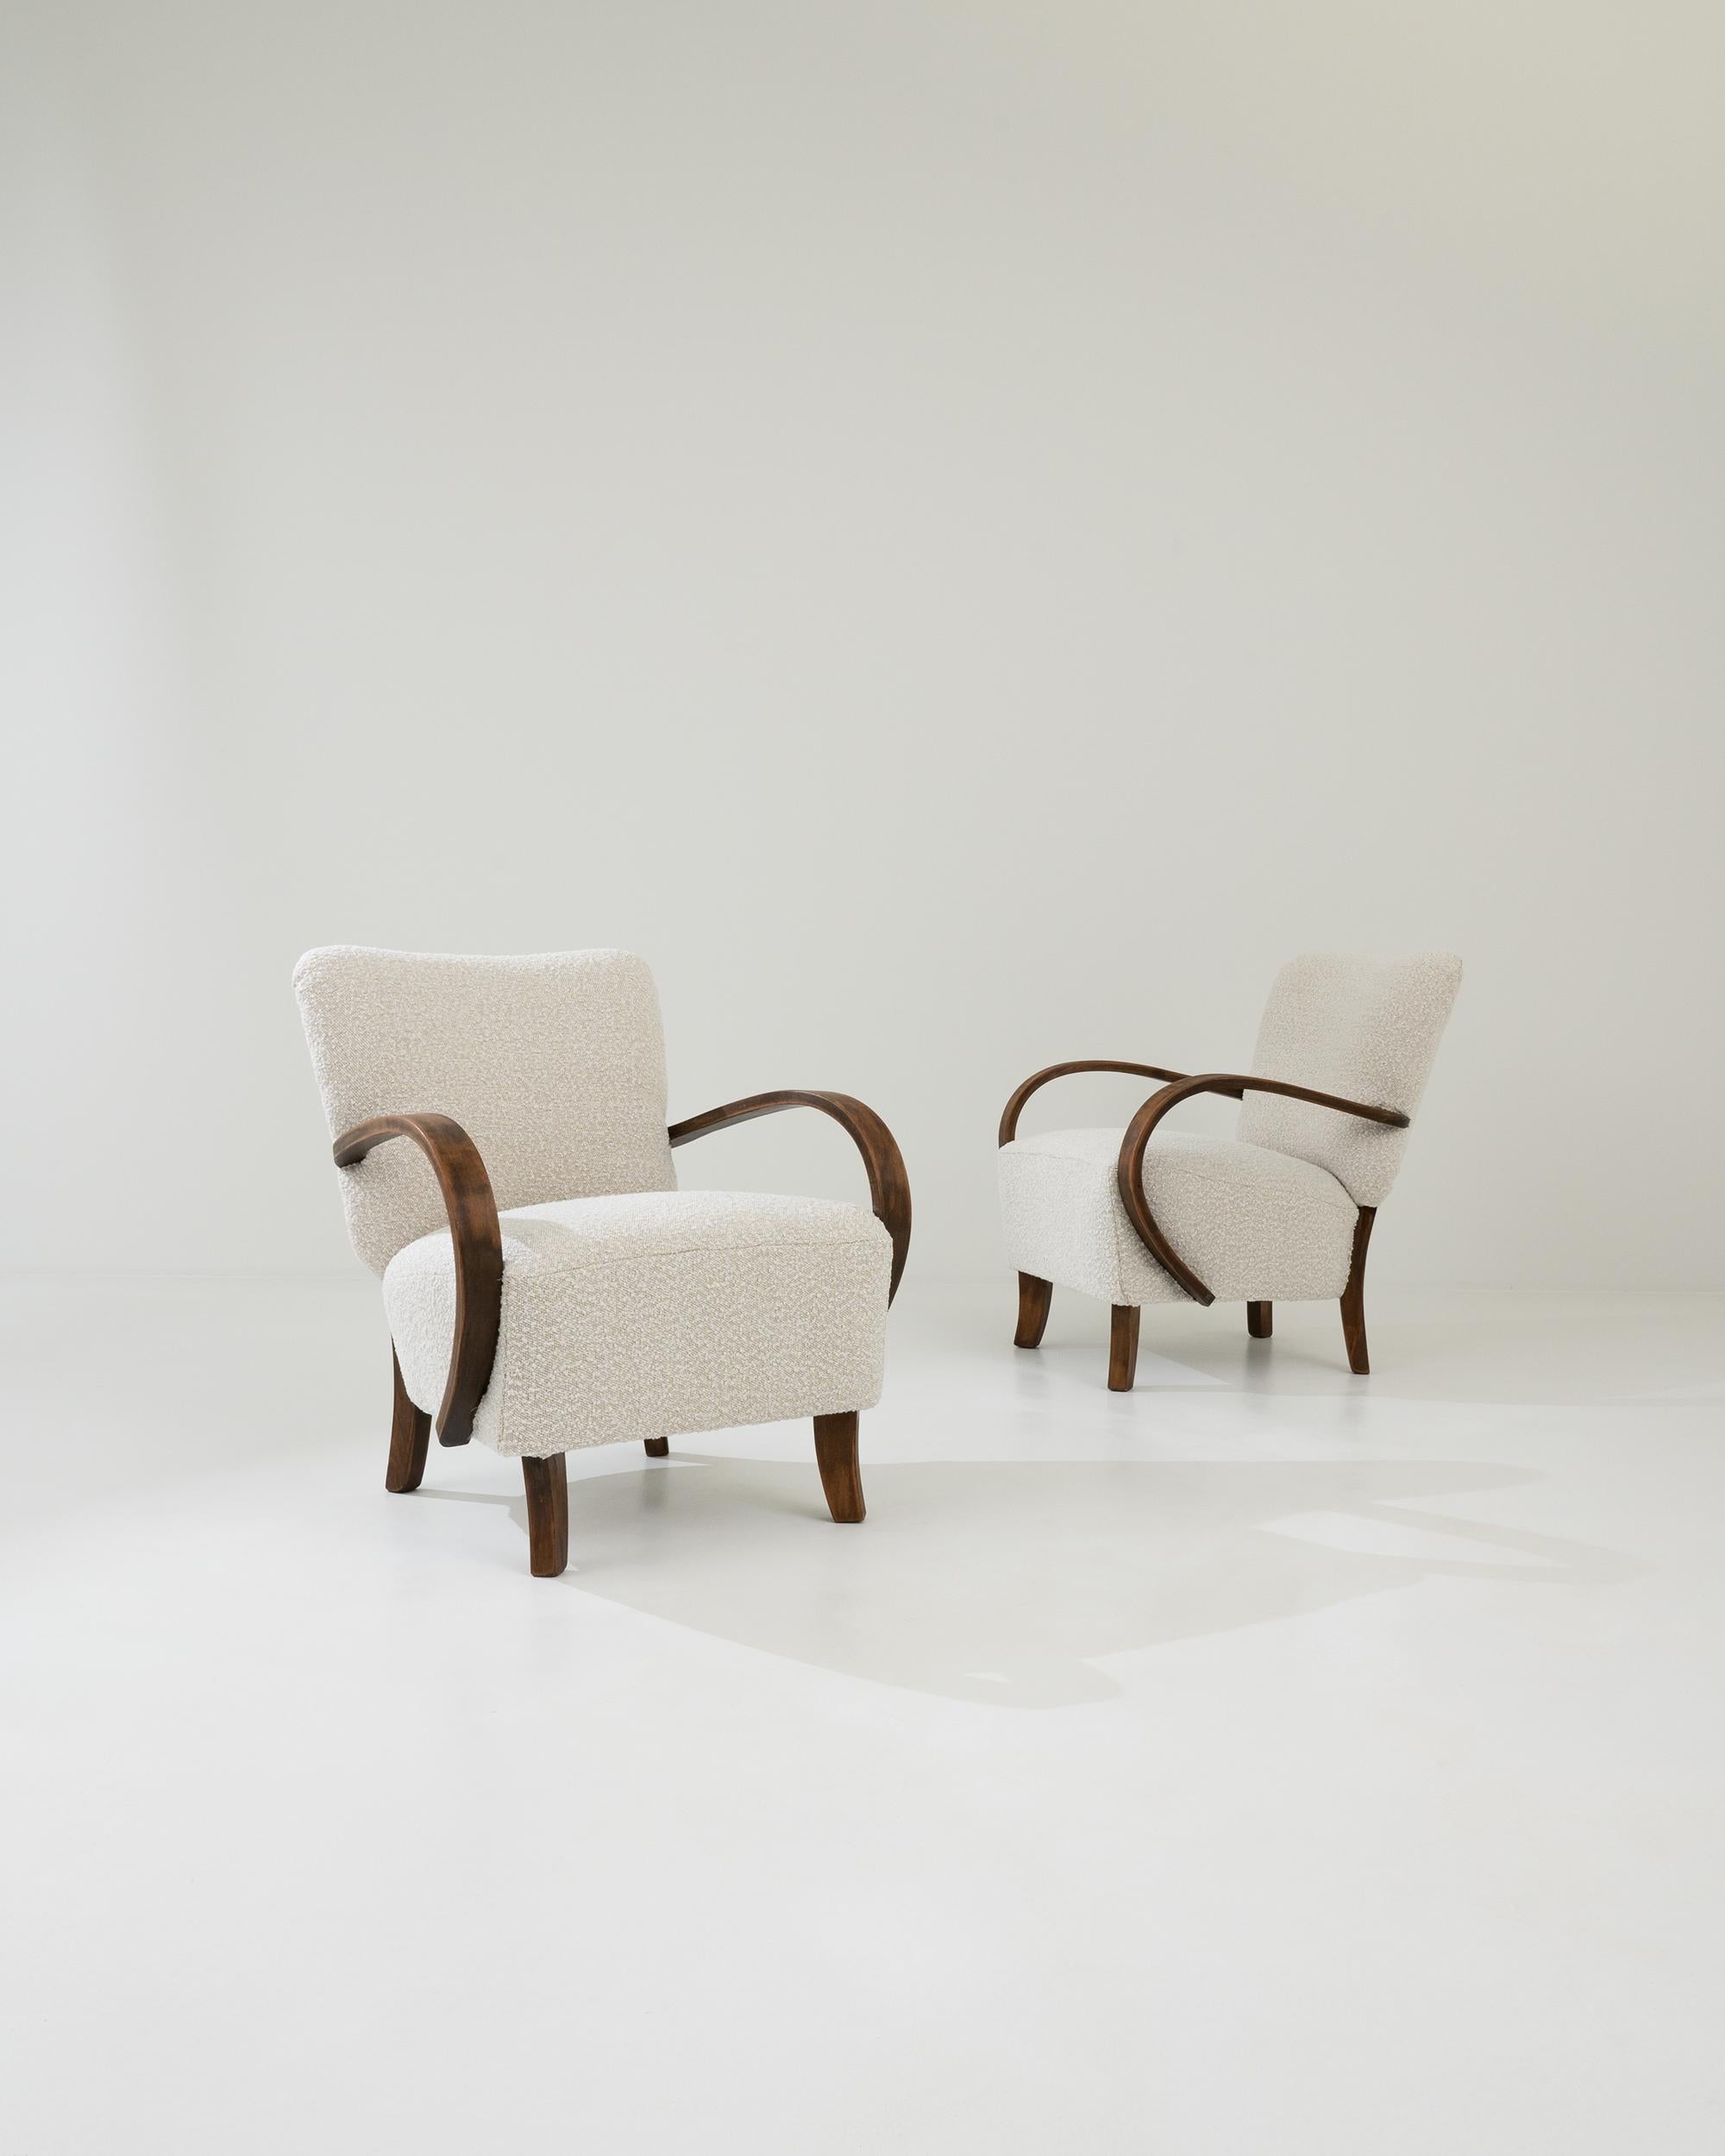 This iconic design by J. Halabala is instantly distinguished by its characteristic bentwood armrests and playful shape. Manufactured circa 1930, these lounge armchairs flaunt a modernist anatomy constituted by dynamic geometry; sturdy square feet